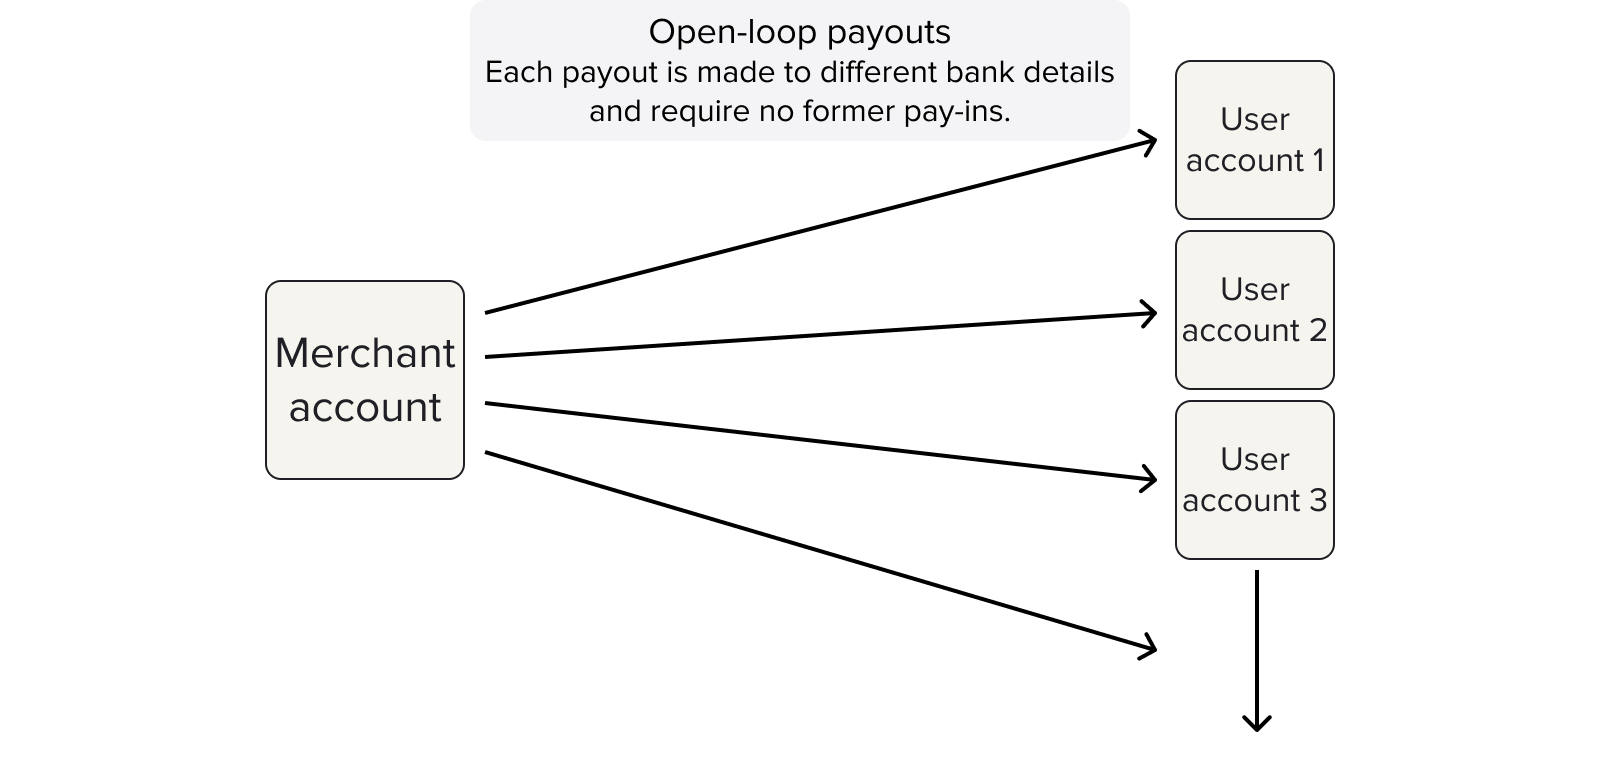 Open-loop payouts can be made to any number of external accounts, given you have funds and the bank details for your users.